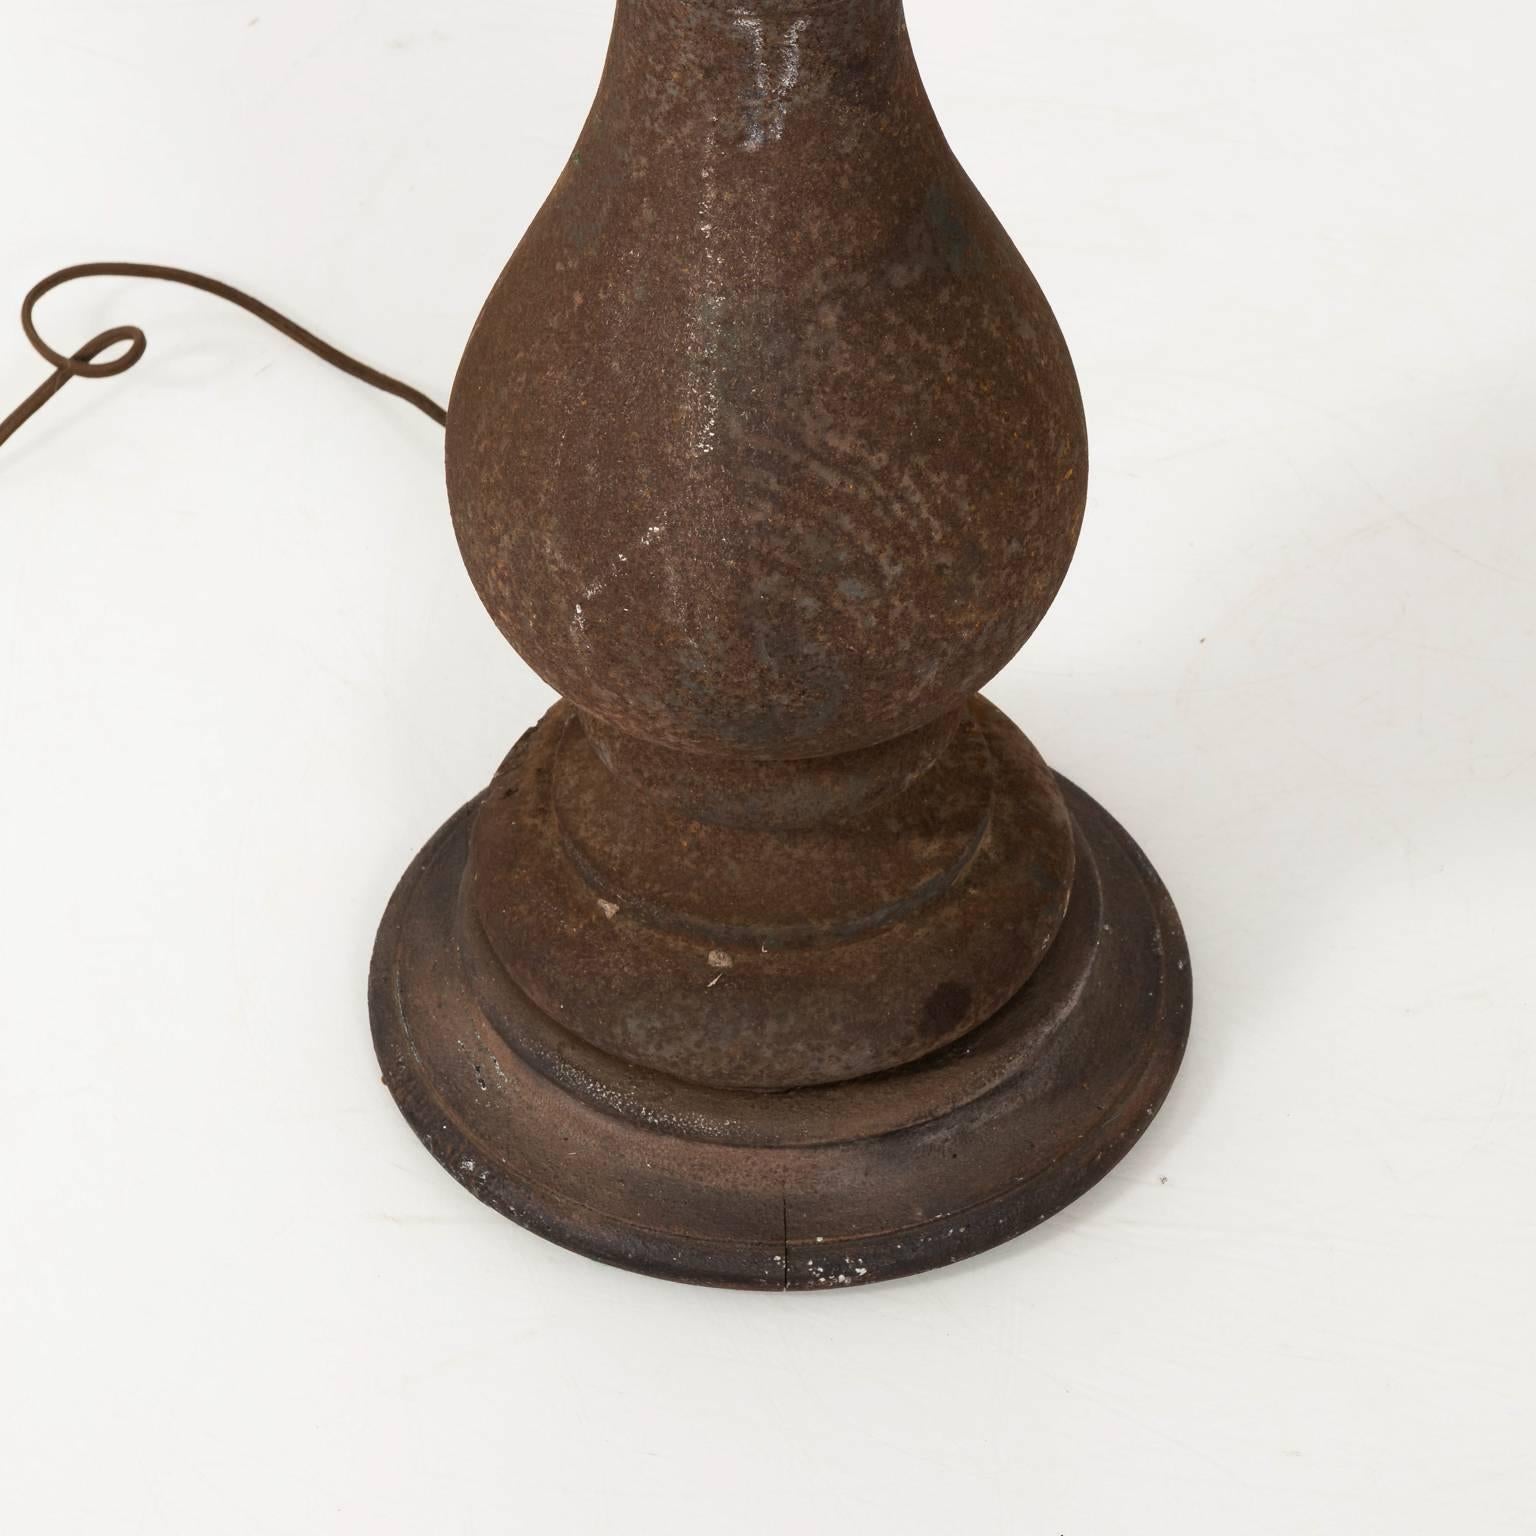 Pair of cast iron baluster lamps with a vase-and-ring turned base and matching finial. Shades not included.